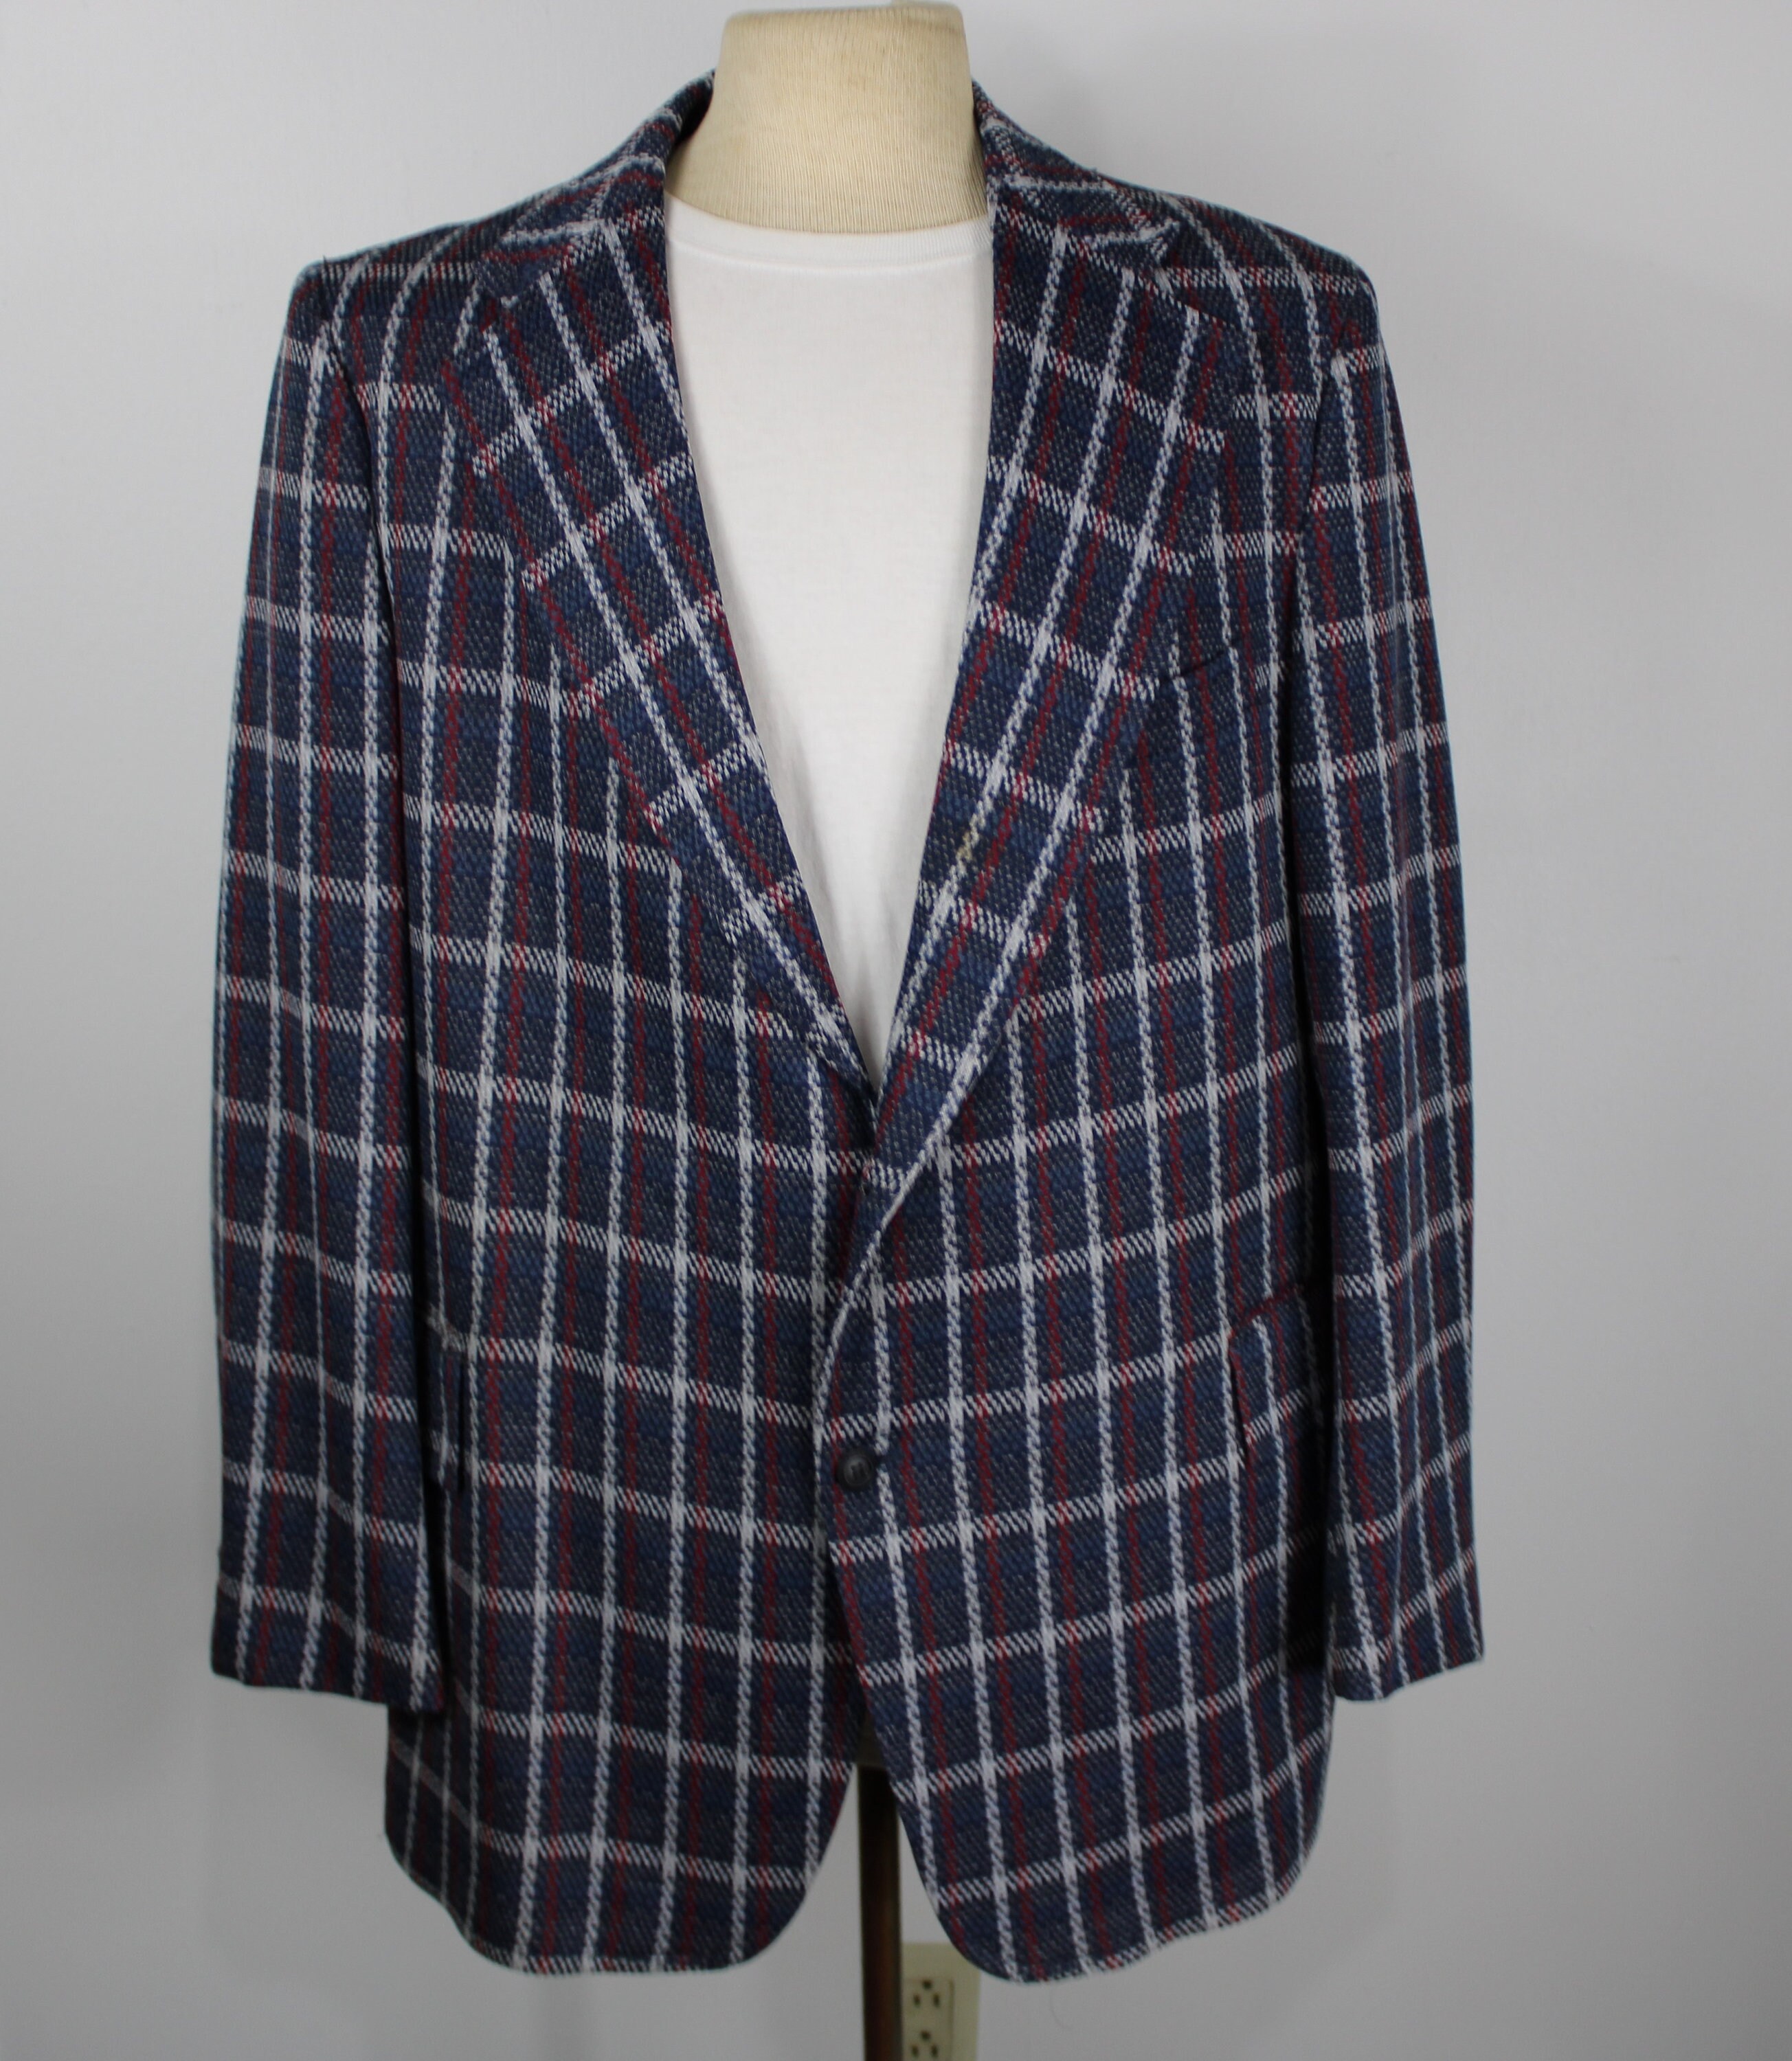 Vintage 1970's Plaid Sports Coat by Continental Club - Etsy